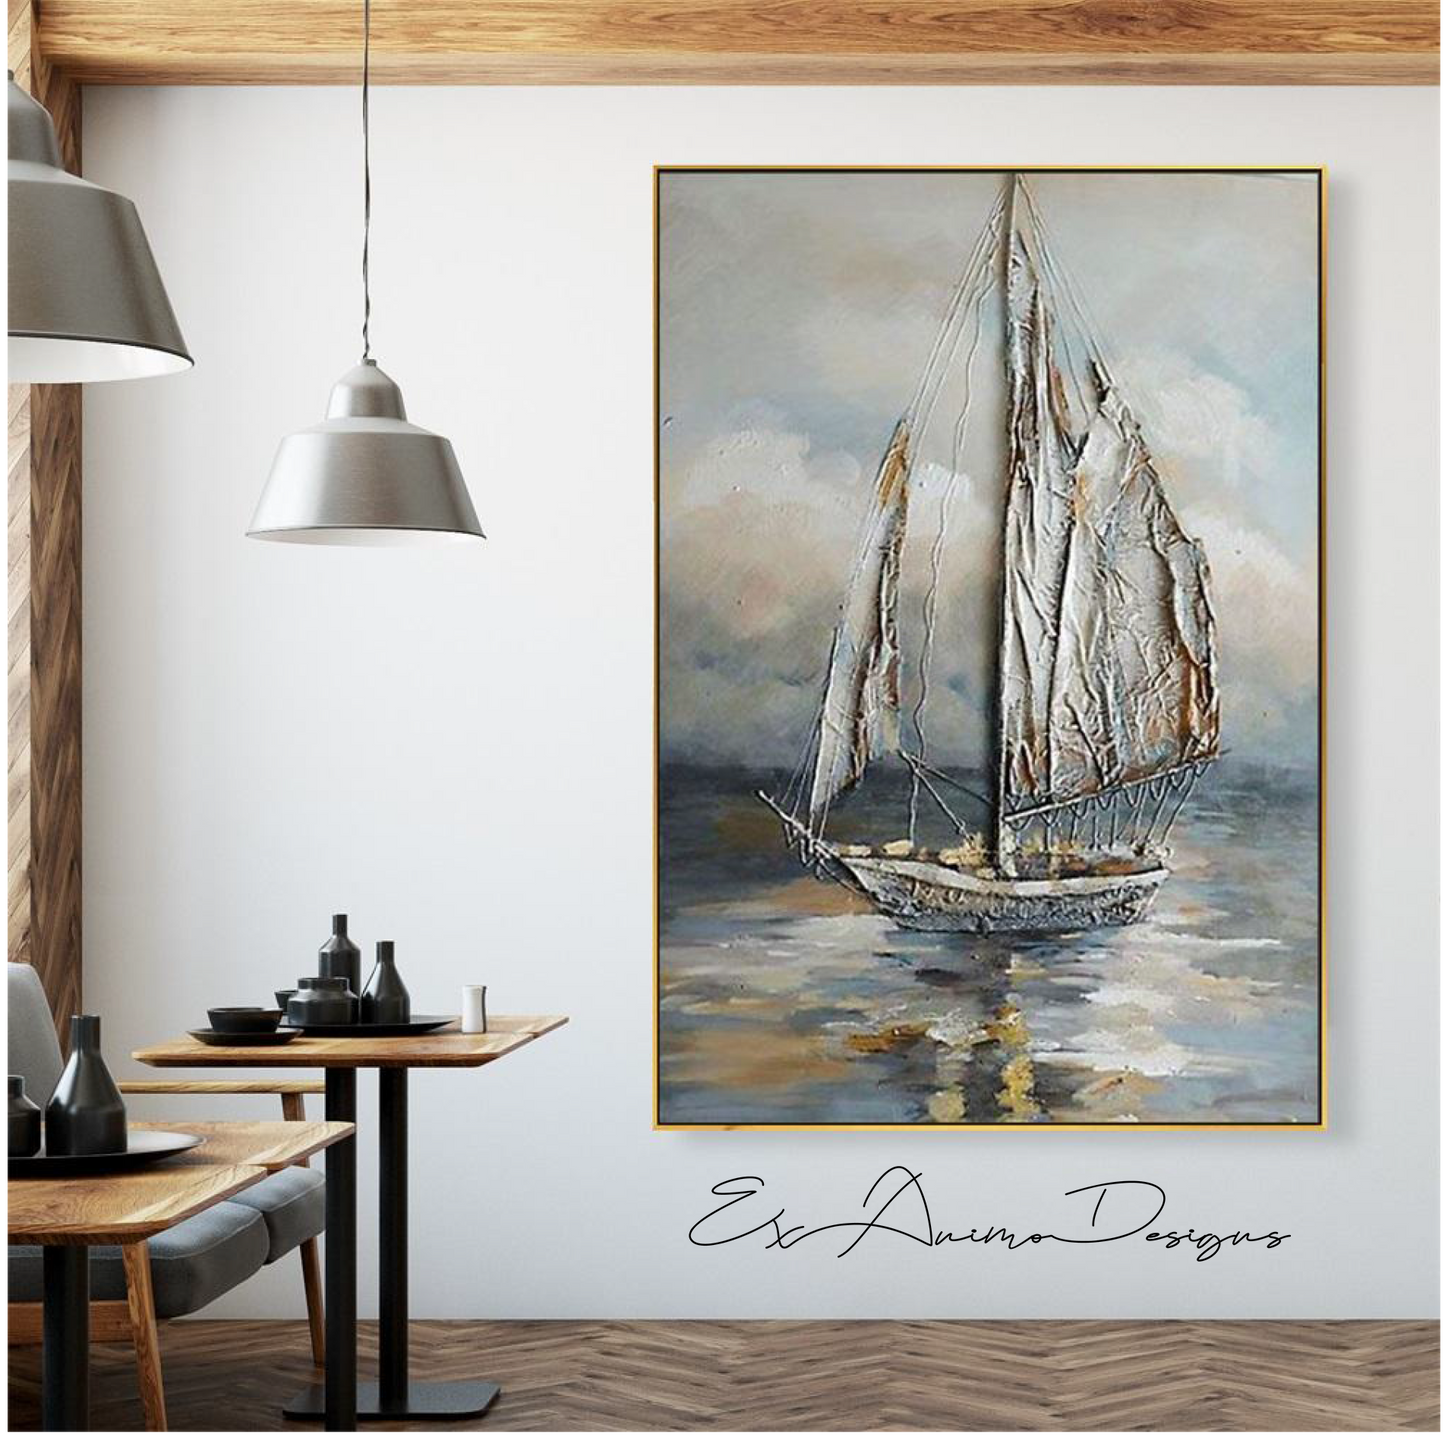 Ex Animo Designs - Sailboat Abstract Painting